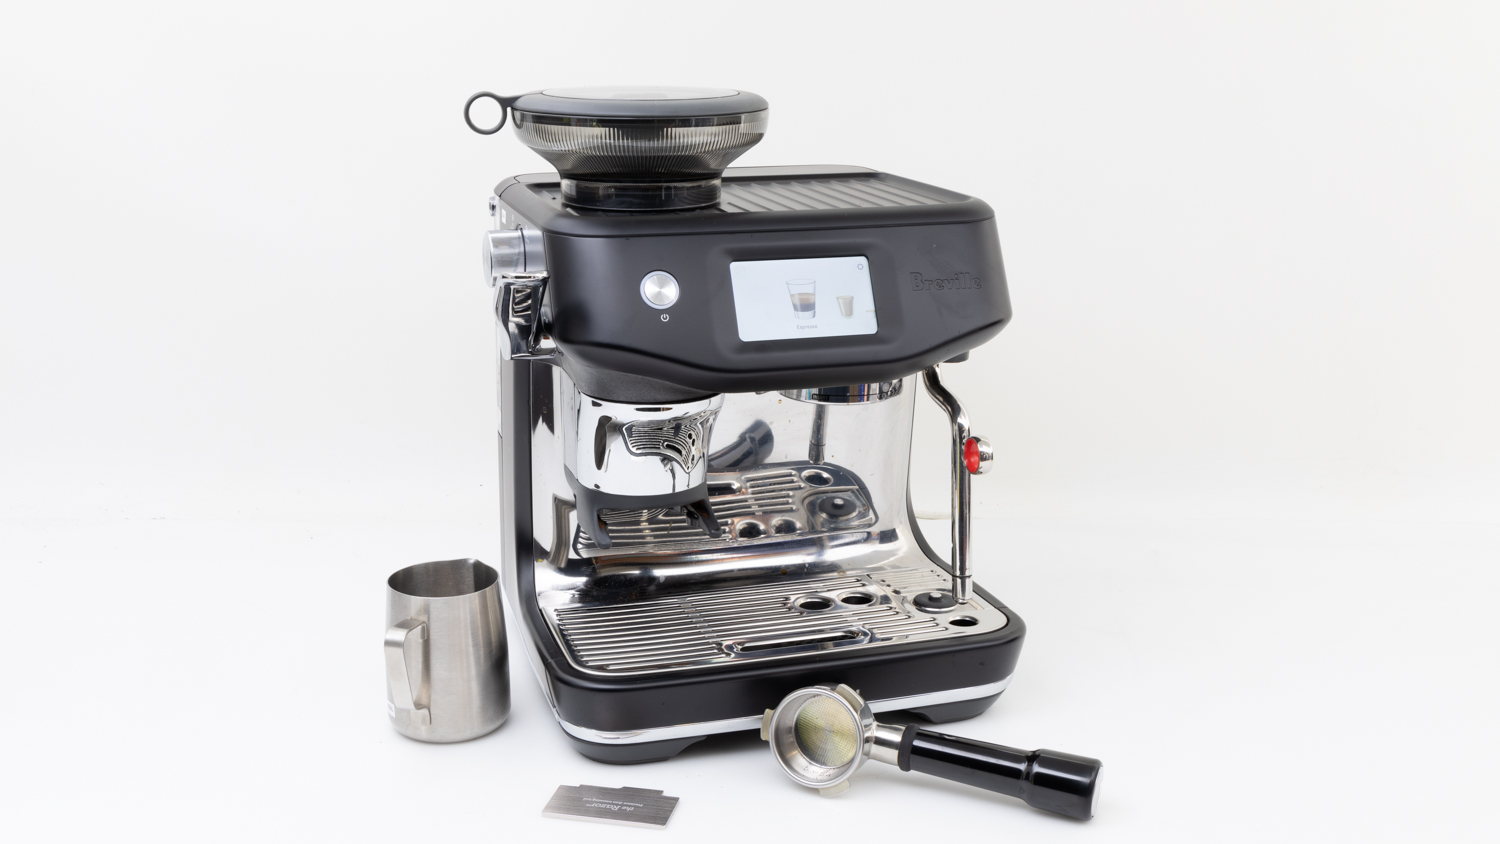 Breville The Barista Touch Impress BES881 carousel image